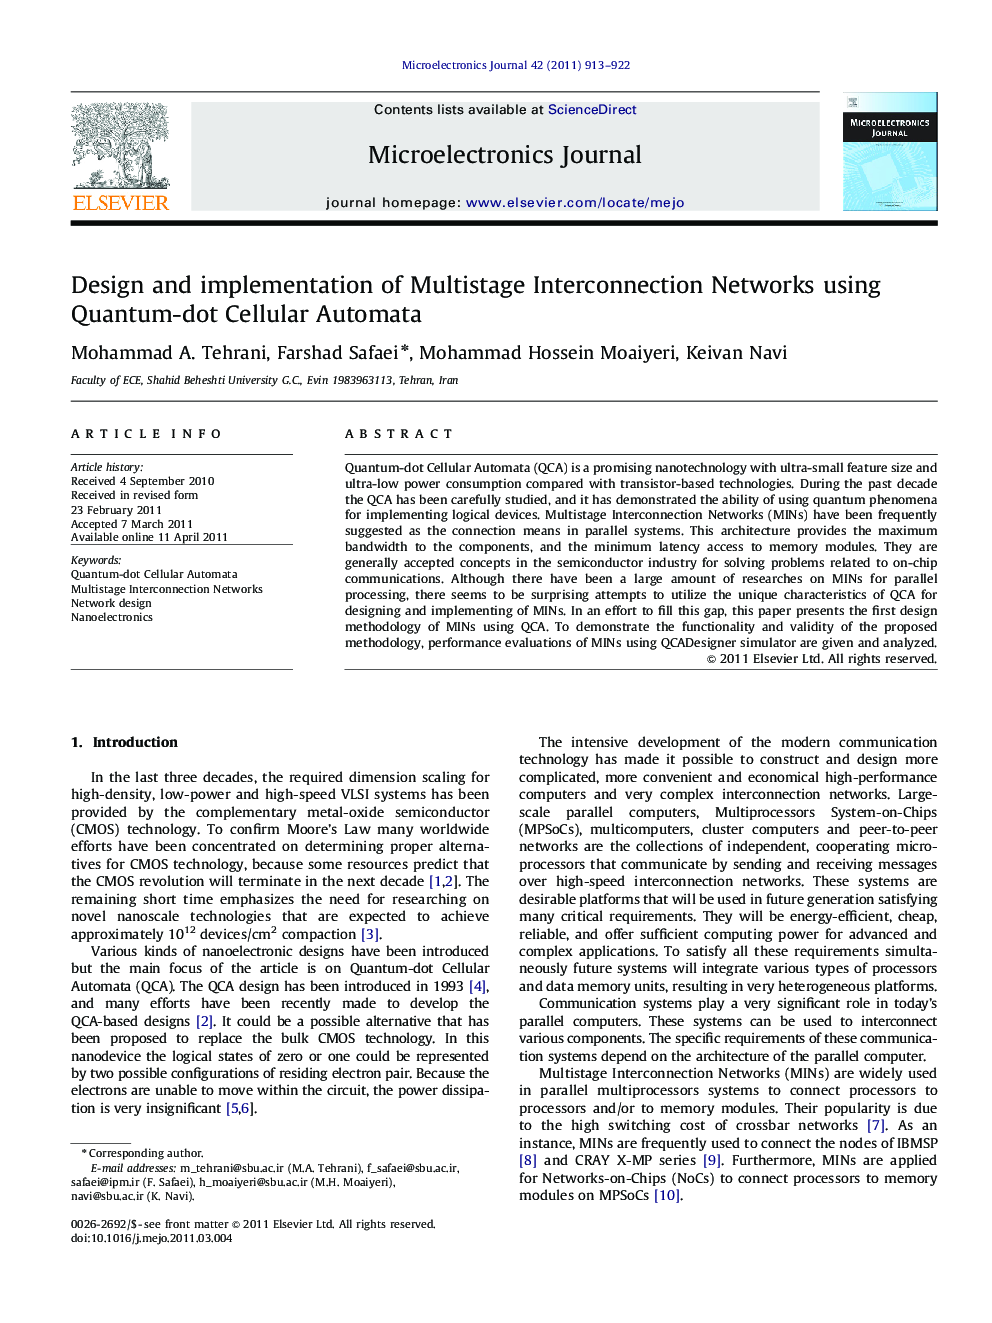 Design and implementation of Multistage Interconnection Networks using Quantum-dot Cellular Automata